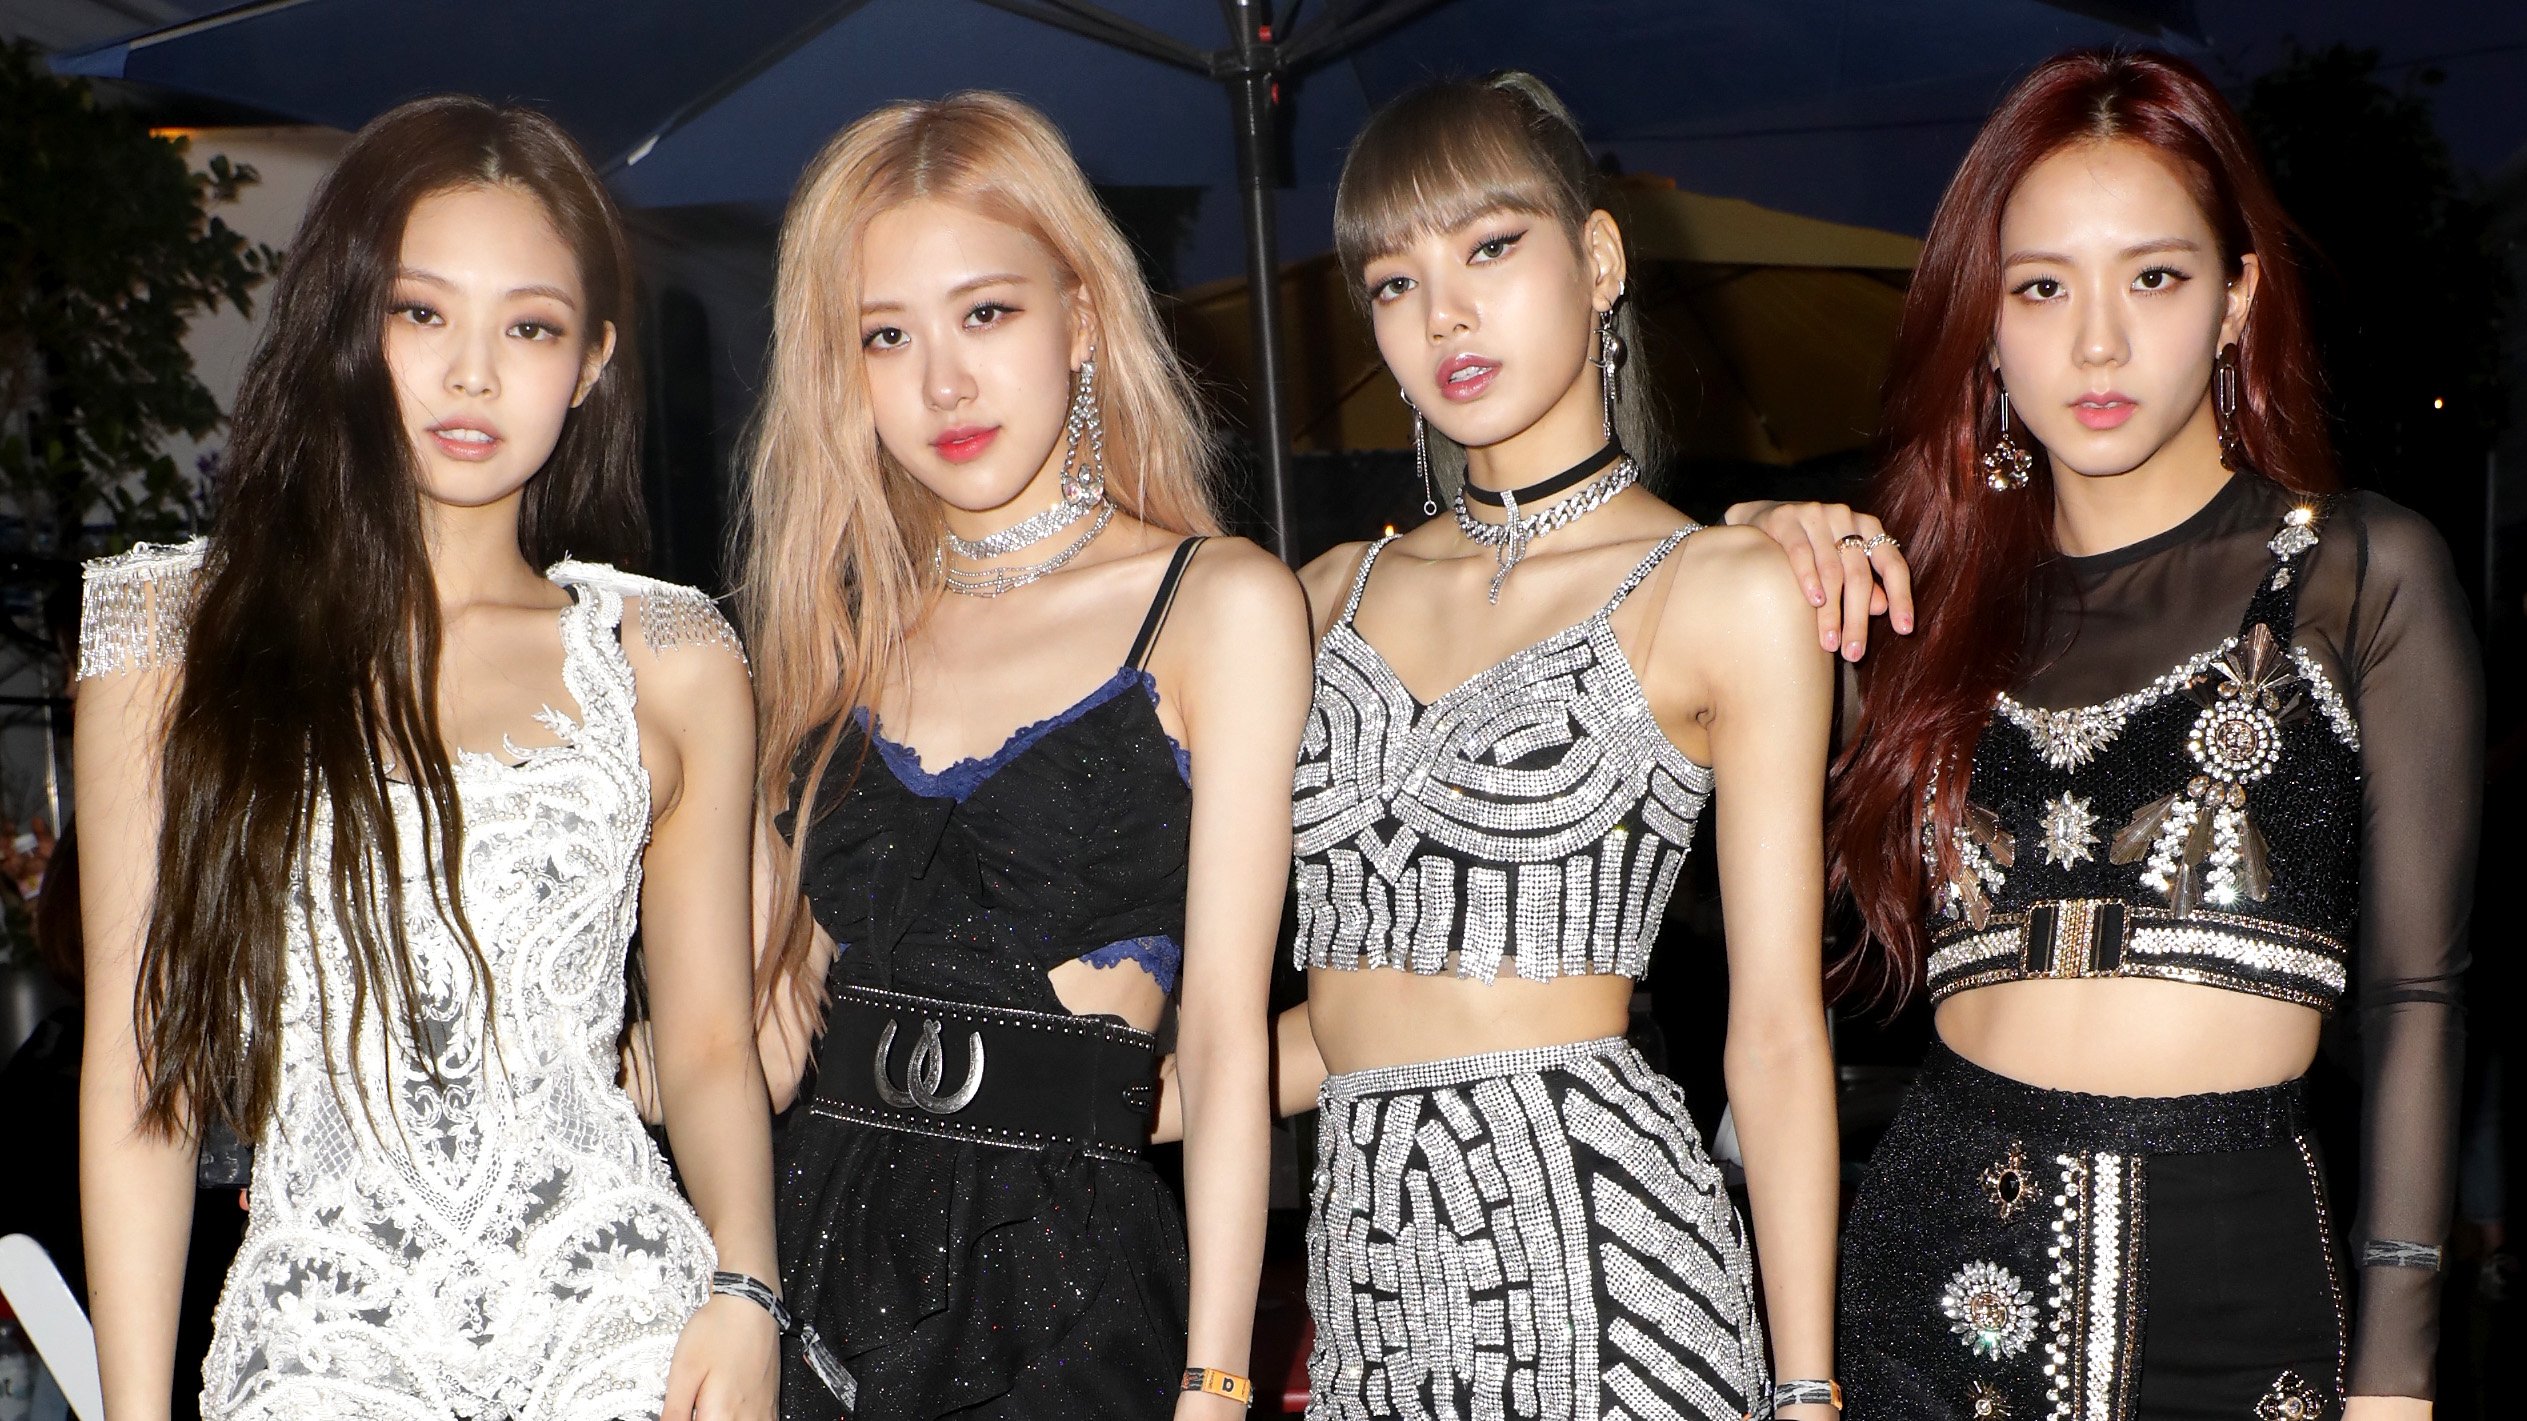 How Old Were the BLACKPINK Members When They Debuted?